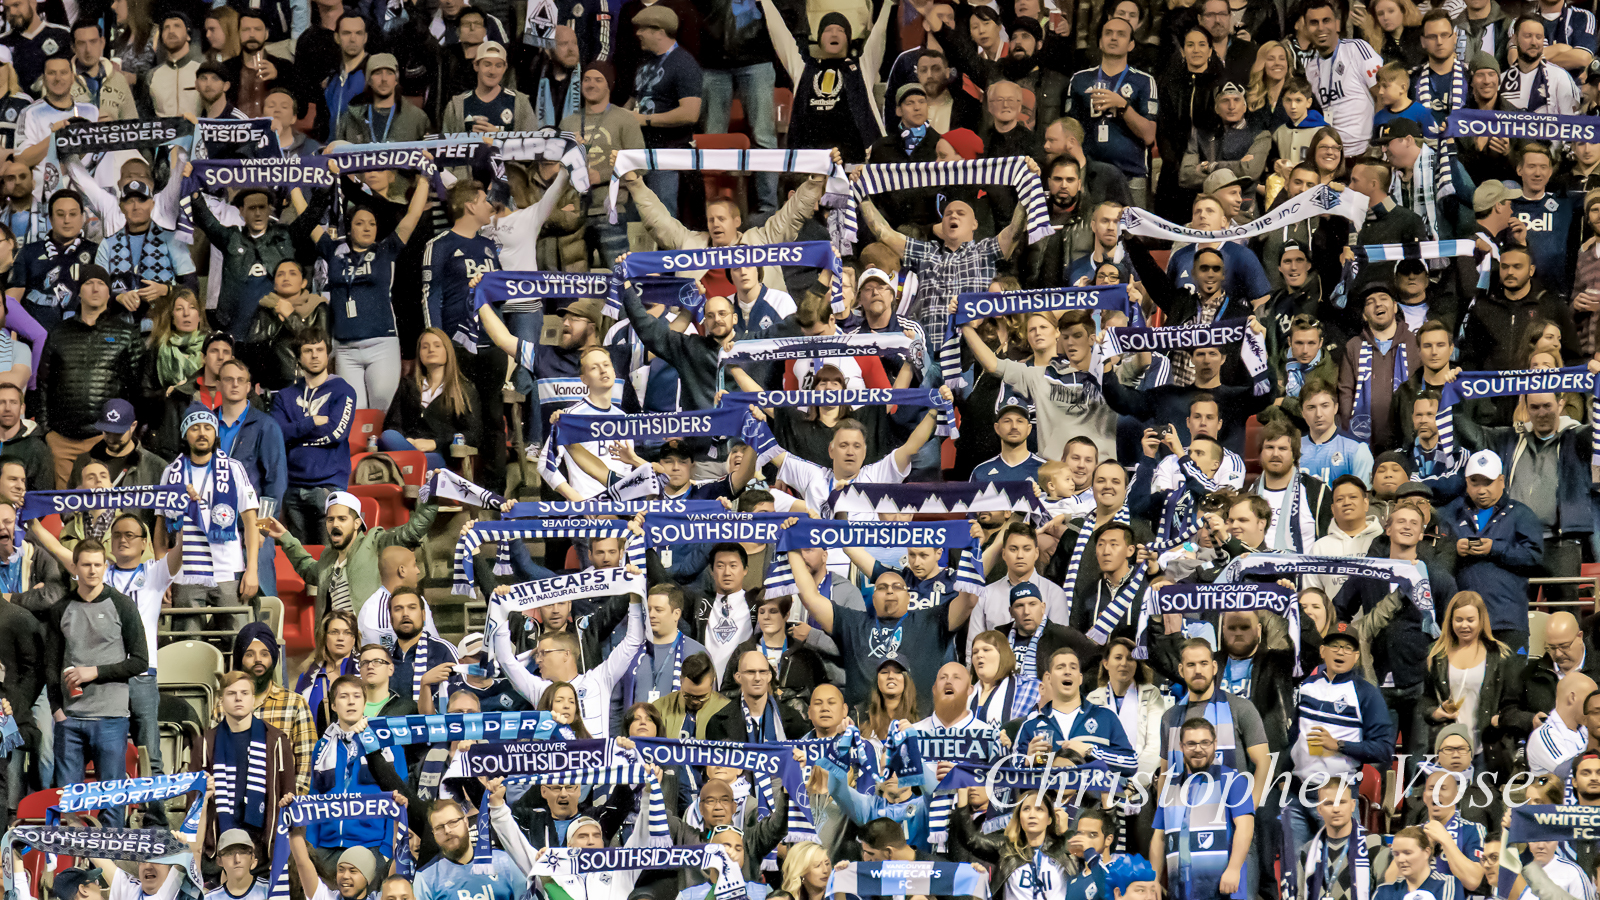 2016-03-26 Vancouver Southsiders.jpg